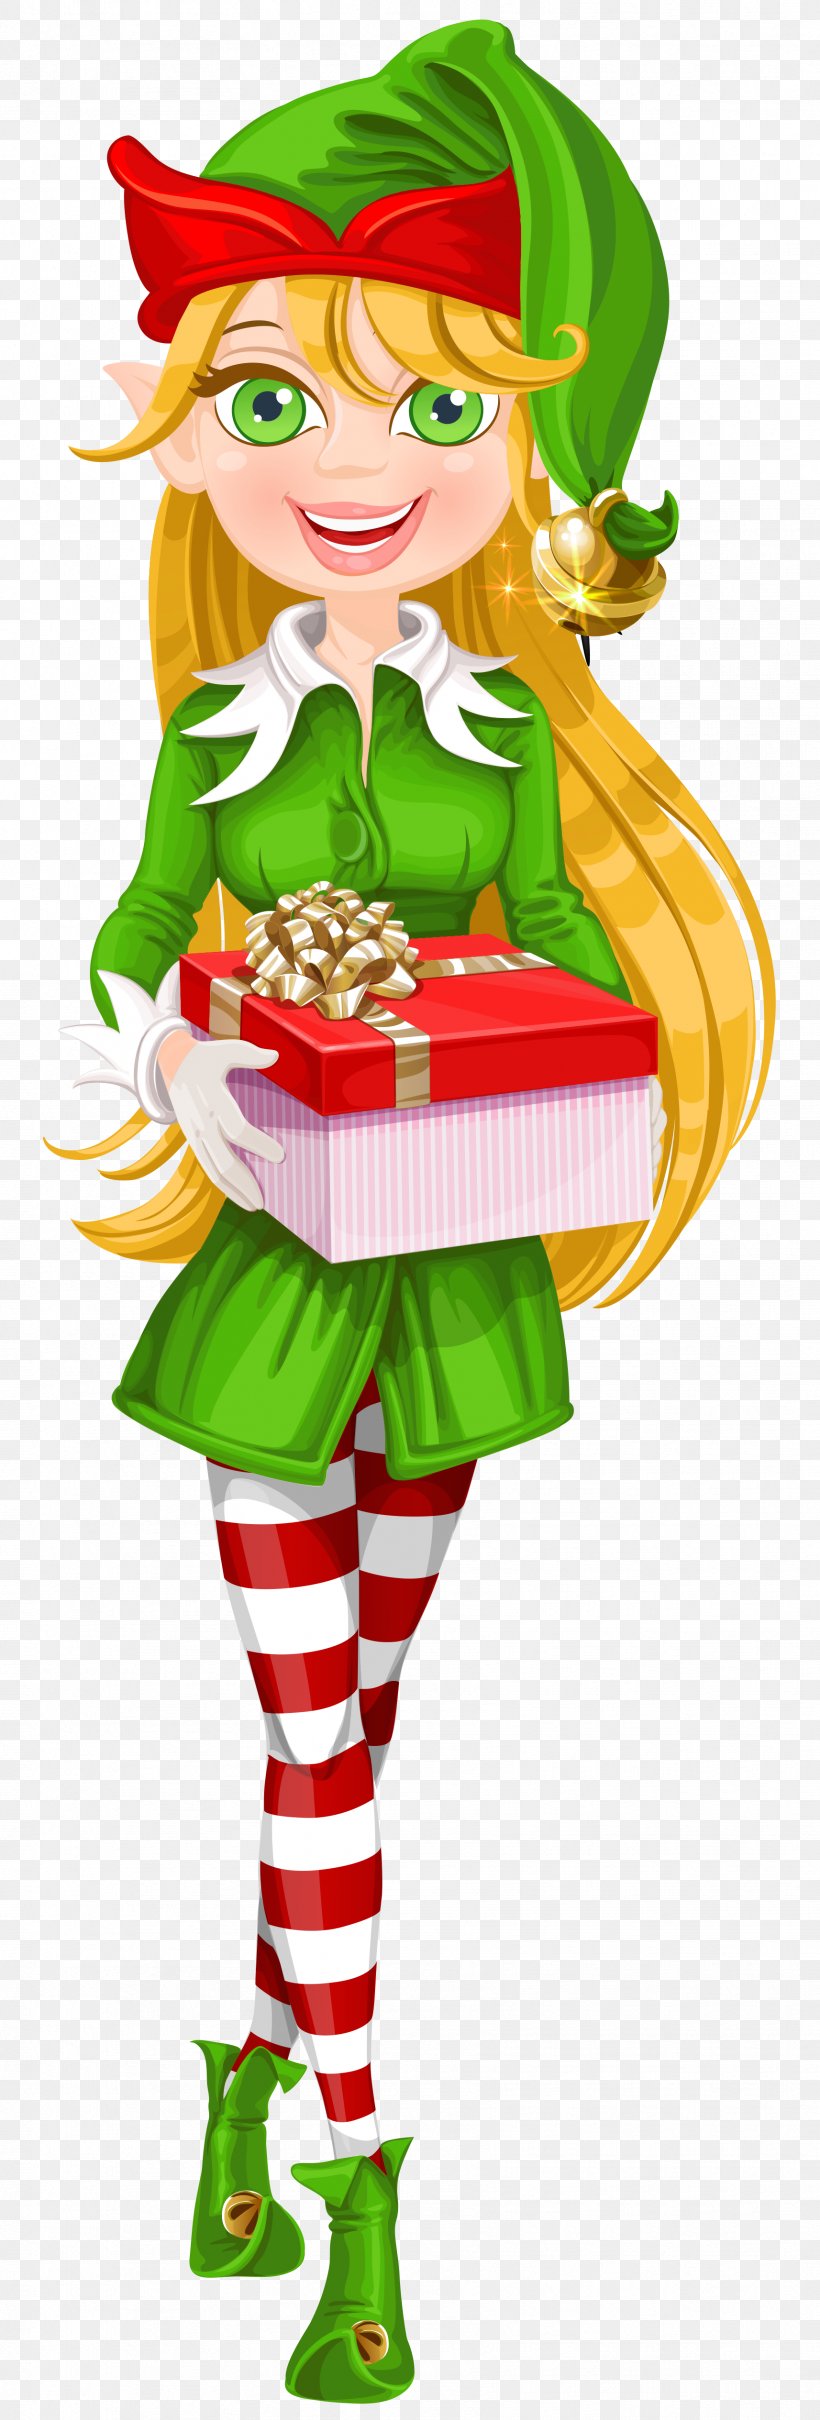 The Elf On The Shelf Clip Art, PNG, 1714x5059px, Elf On The Shelf, Art, Cartoon, Christmas, Christmas Card Download Free